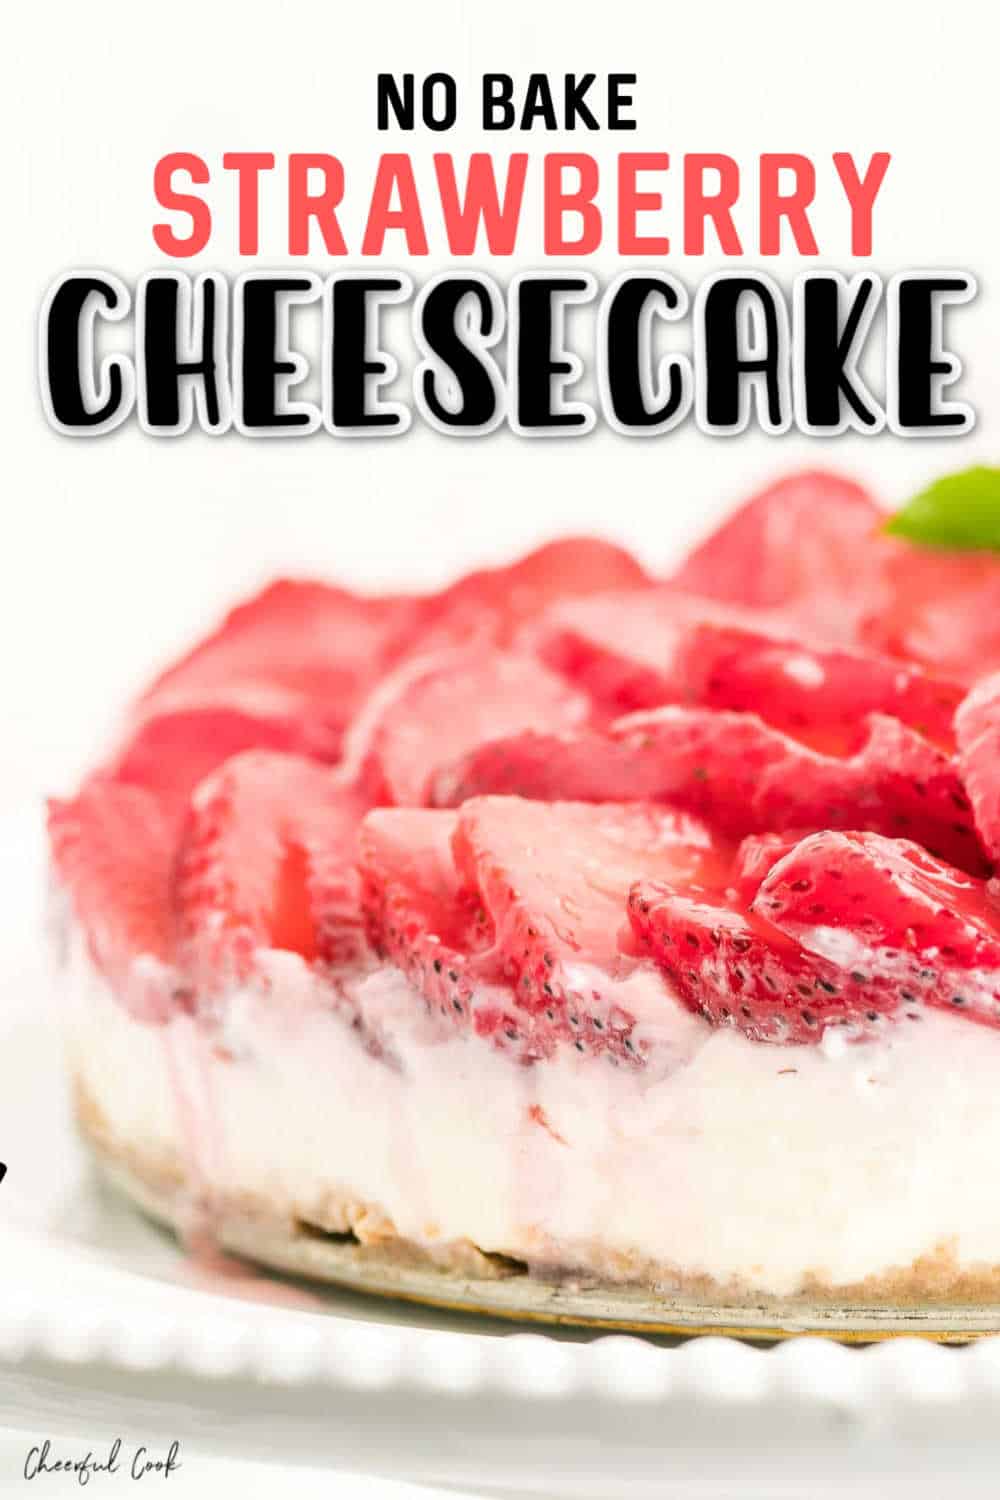 This easy no-fail, no bake Strawberry Cheesecake is a perfect summertime treat. It's got a classic, buttery graham cracker crust, creamy cheesecake filling, and a layer of glazed fresh strawberries. And it's simply delicious. #cheerfulcook #easy #nobake #cheesecake #strawberry #dessert via @cheerfulcook